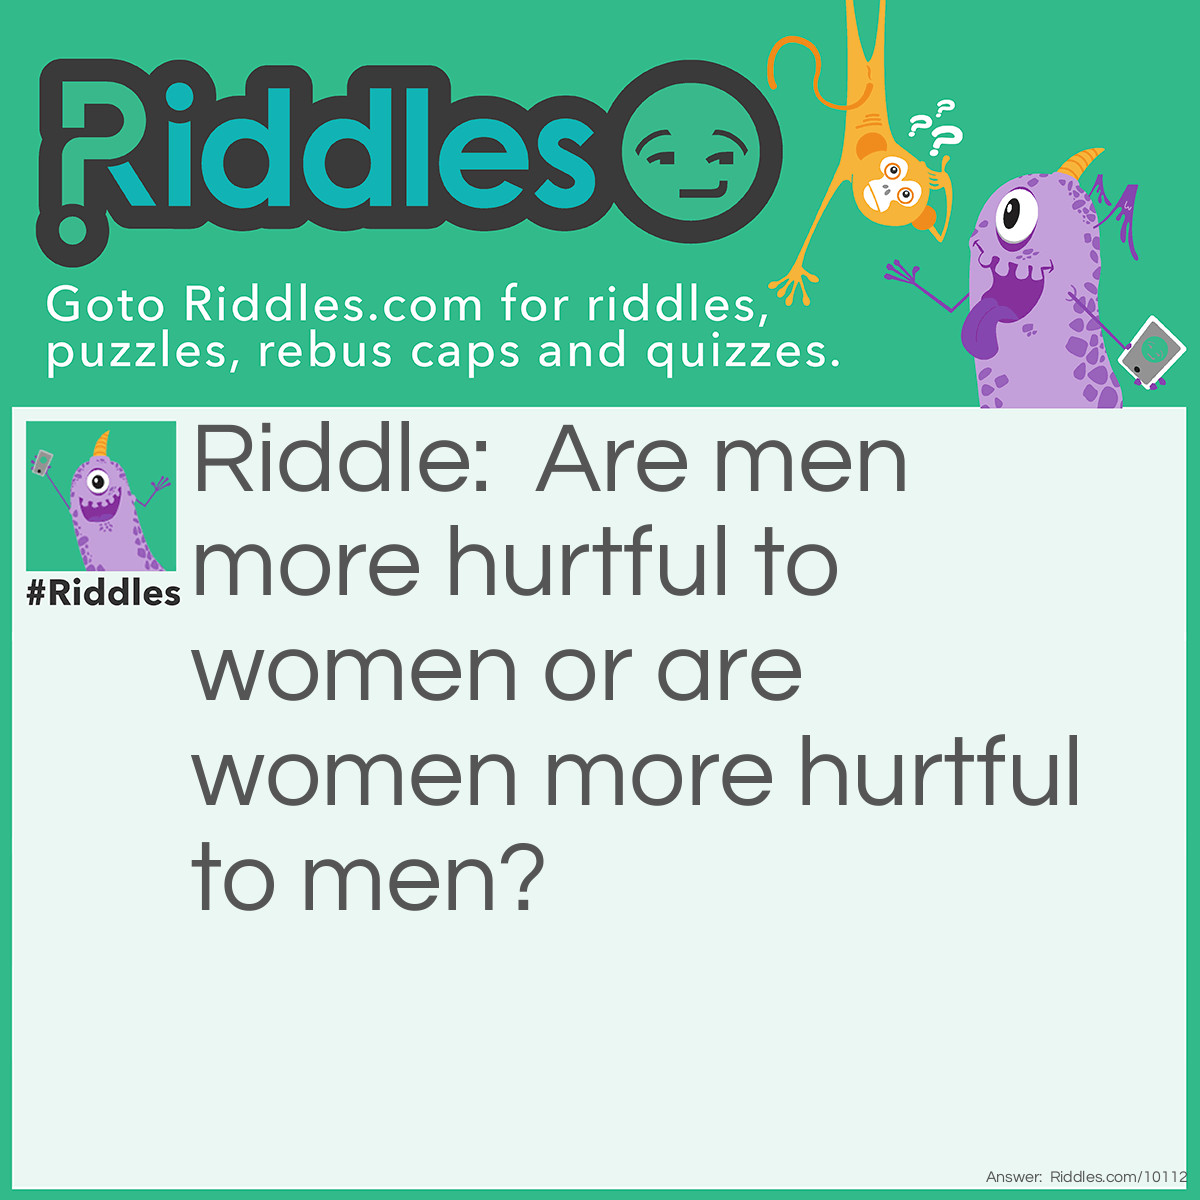 Riddle: Are men more hurtful to women or are women more hurtful to men? Answer: Women are more hurtful to men. We just don't talk about it so you don't actually know about it.